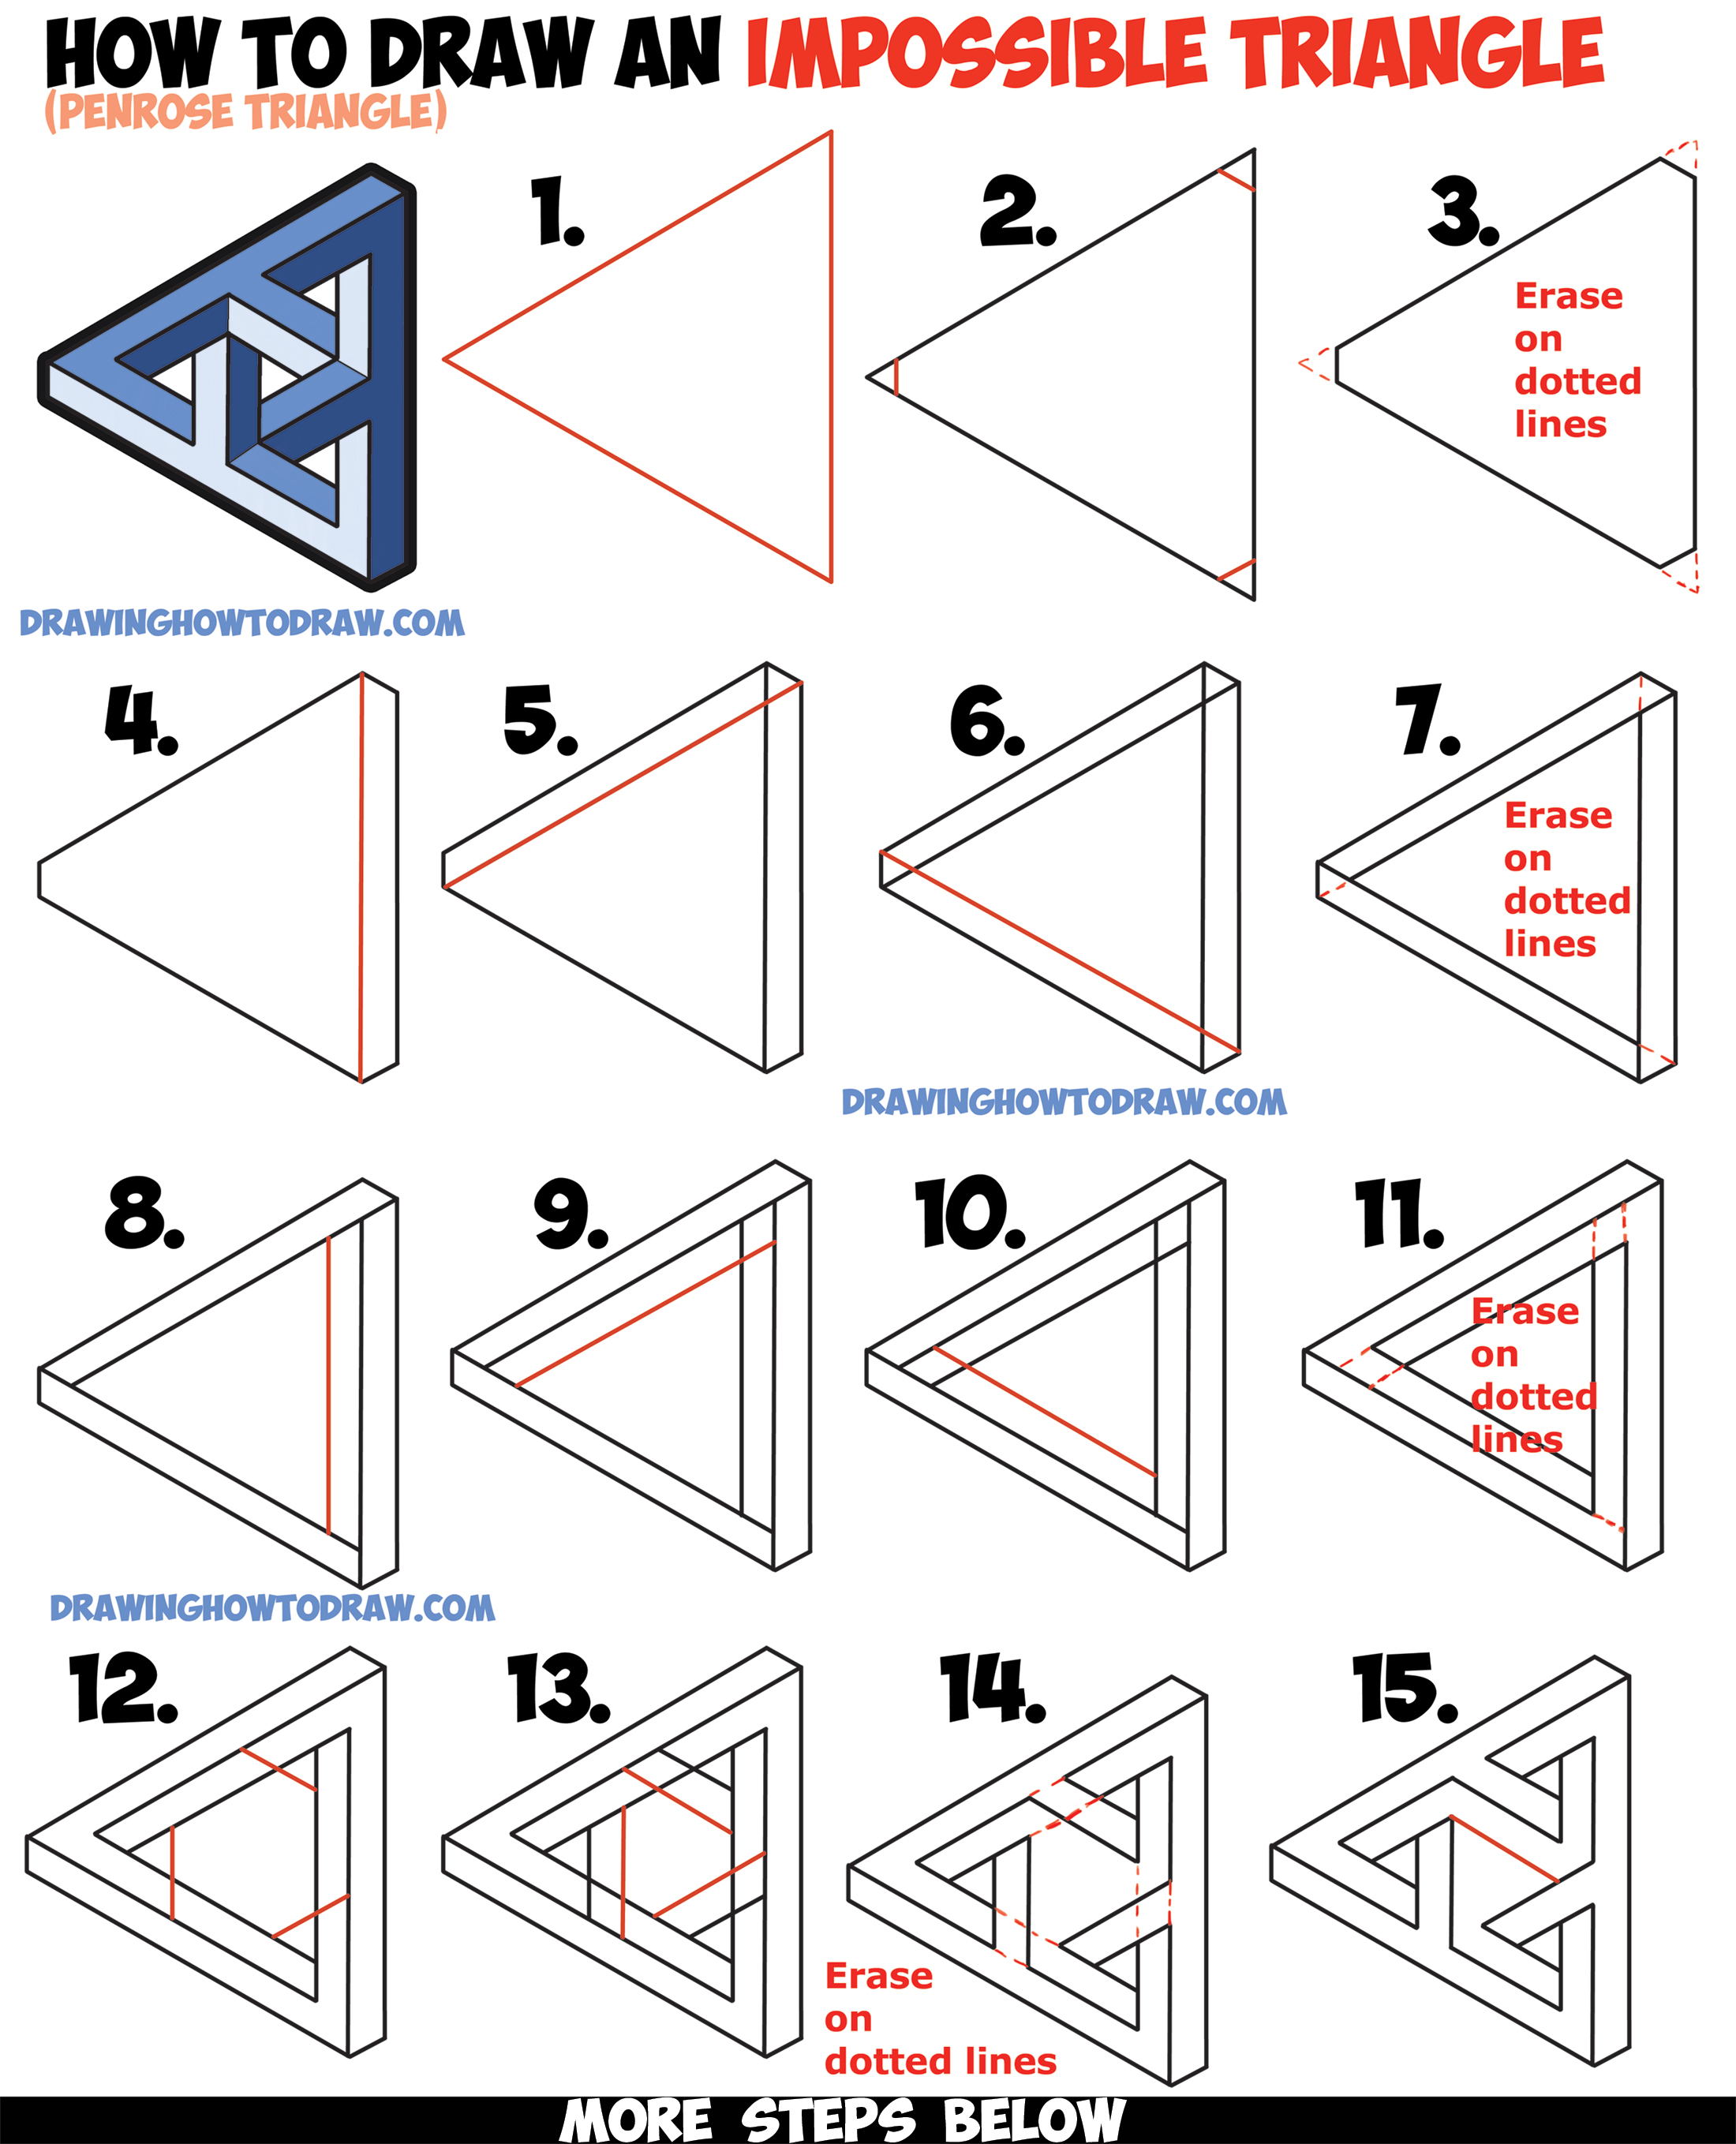 How to Draw an Impossible Triangle (Penrose Triangle) That ...